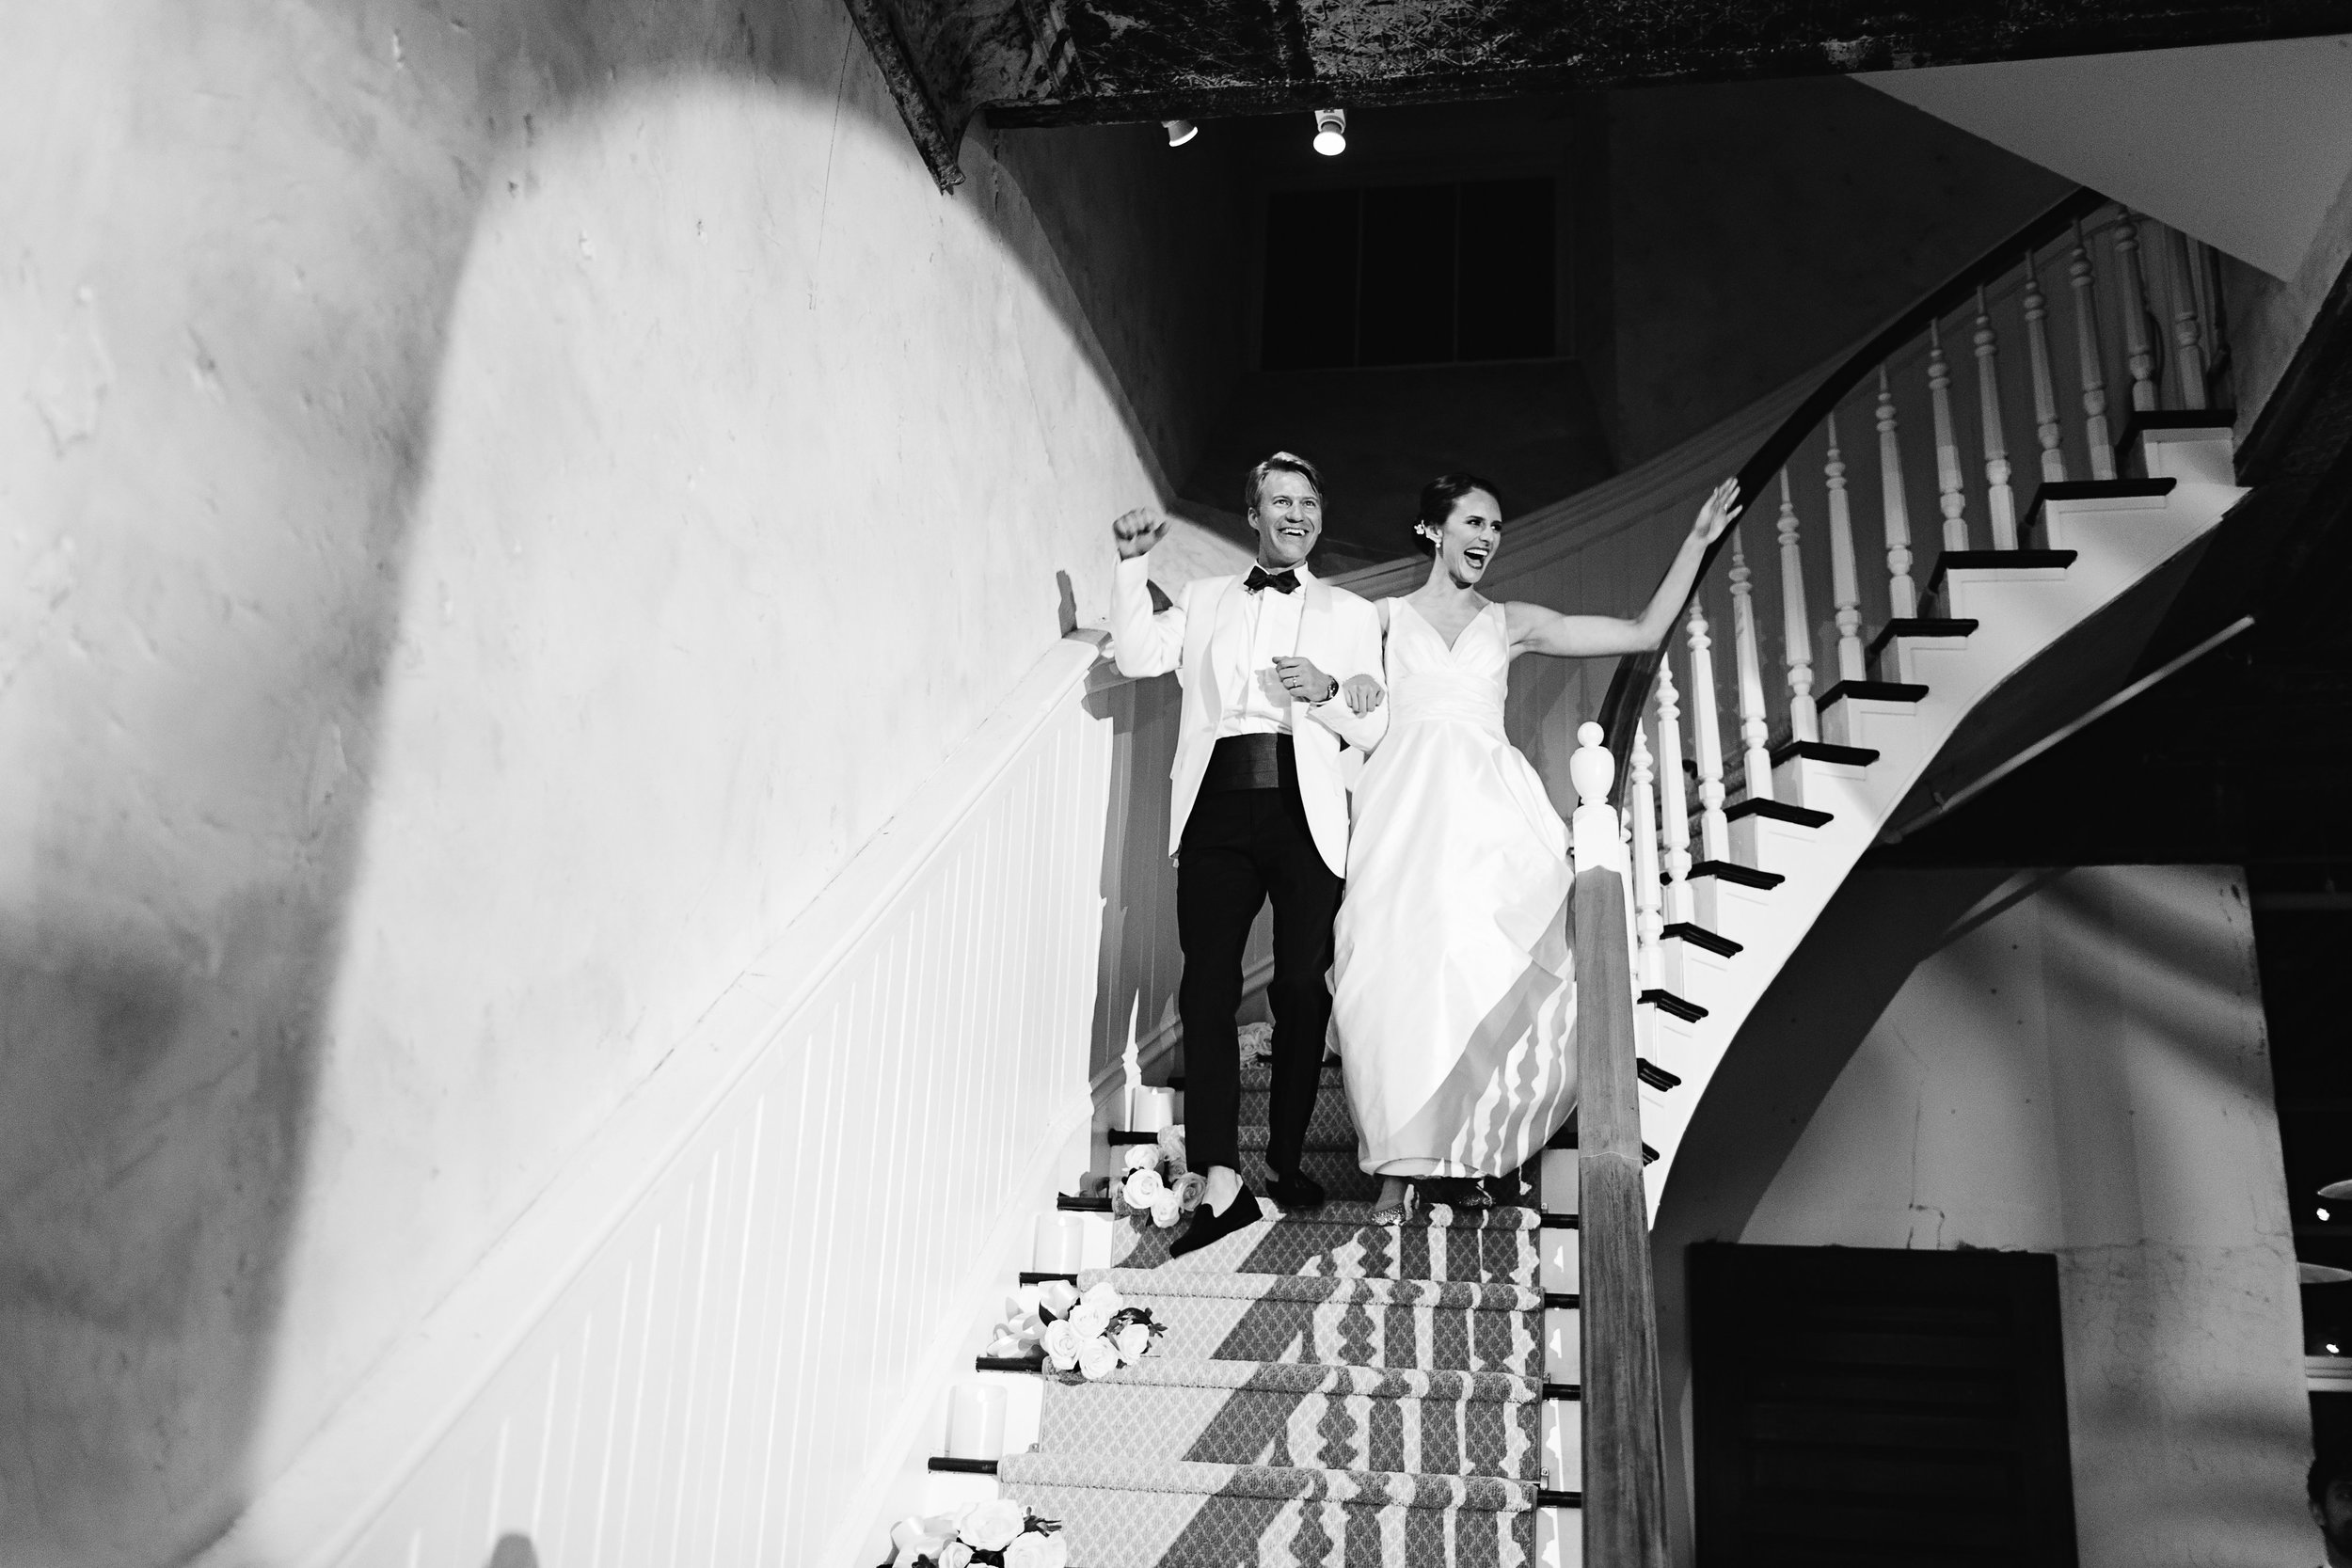 Bride and groom waving to crowd as they descend grand staircase